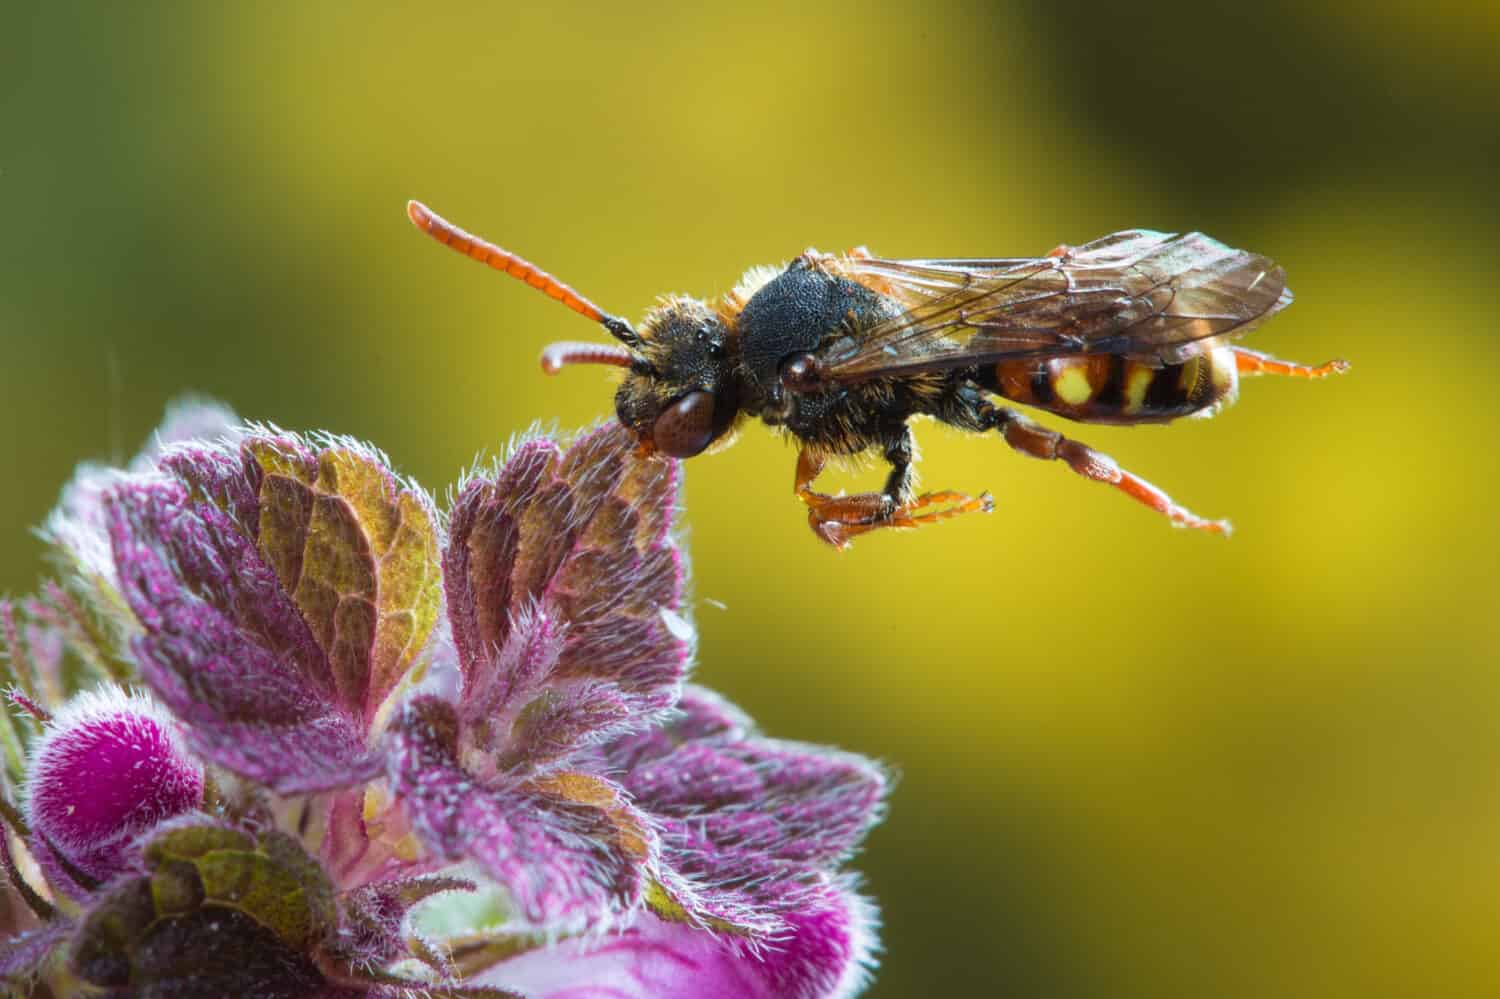 Cuckoo bee Nomada  Species is resting on a plant